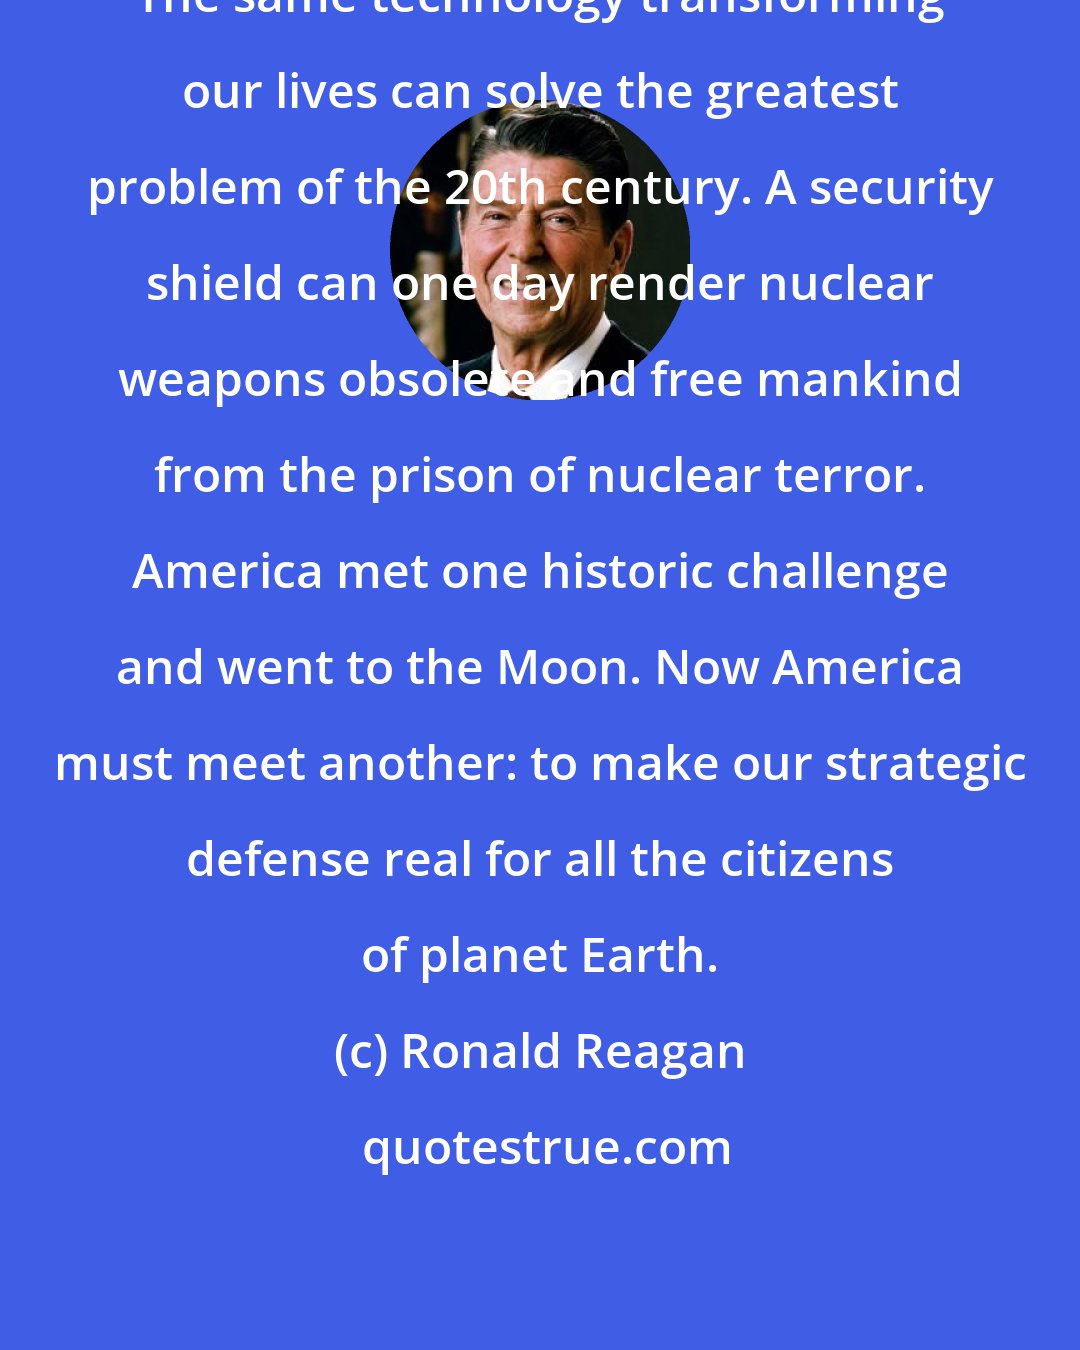 Ronald Reagan: The same technology transforming our lives can solve the greatest problem of the 20th century. A security shield can one day render nuclear weapons obsolete and free mankind from the prison of nuclear terror. America met one historic challenge and went to the Moon. Now America must meet another: to make our strategic defense real for all the citizens of planet Earth.